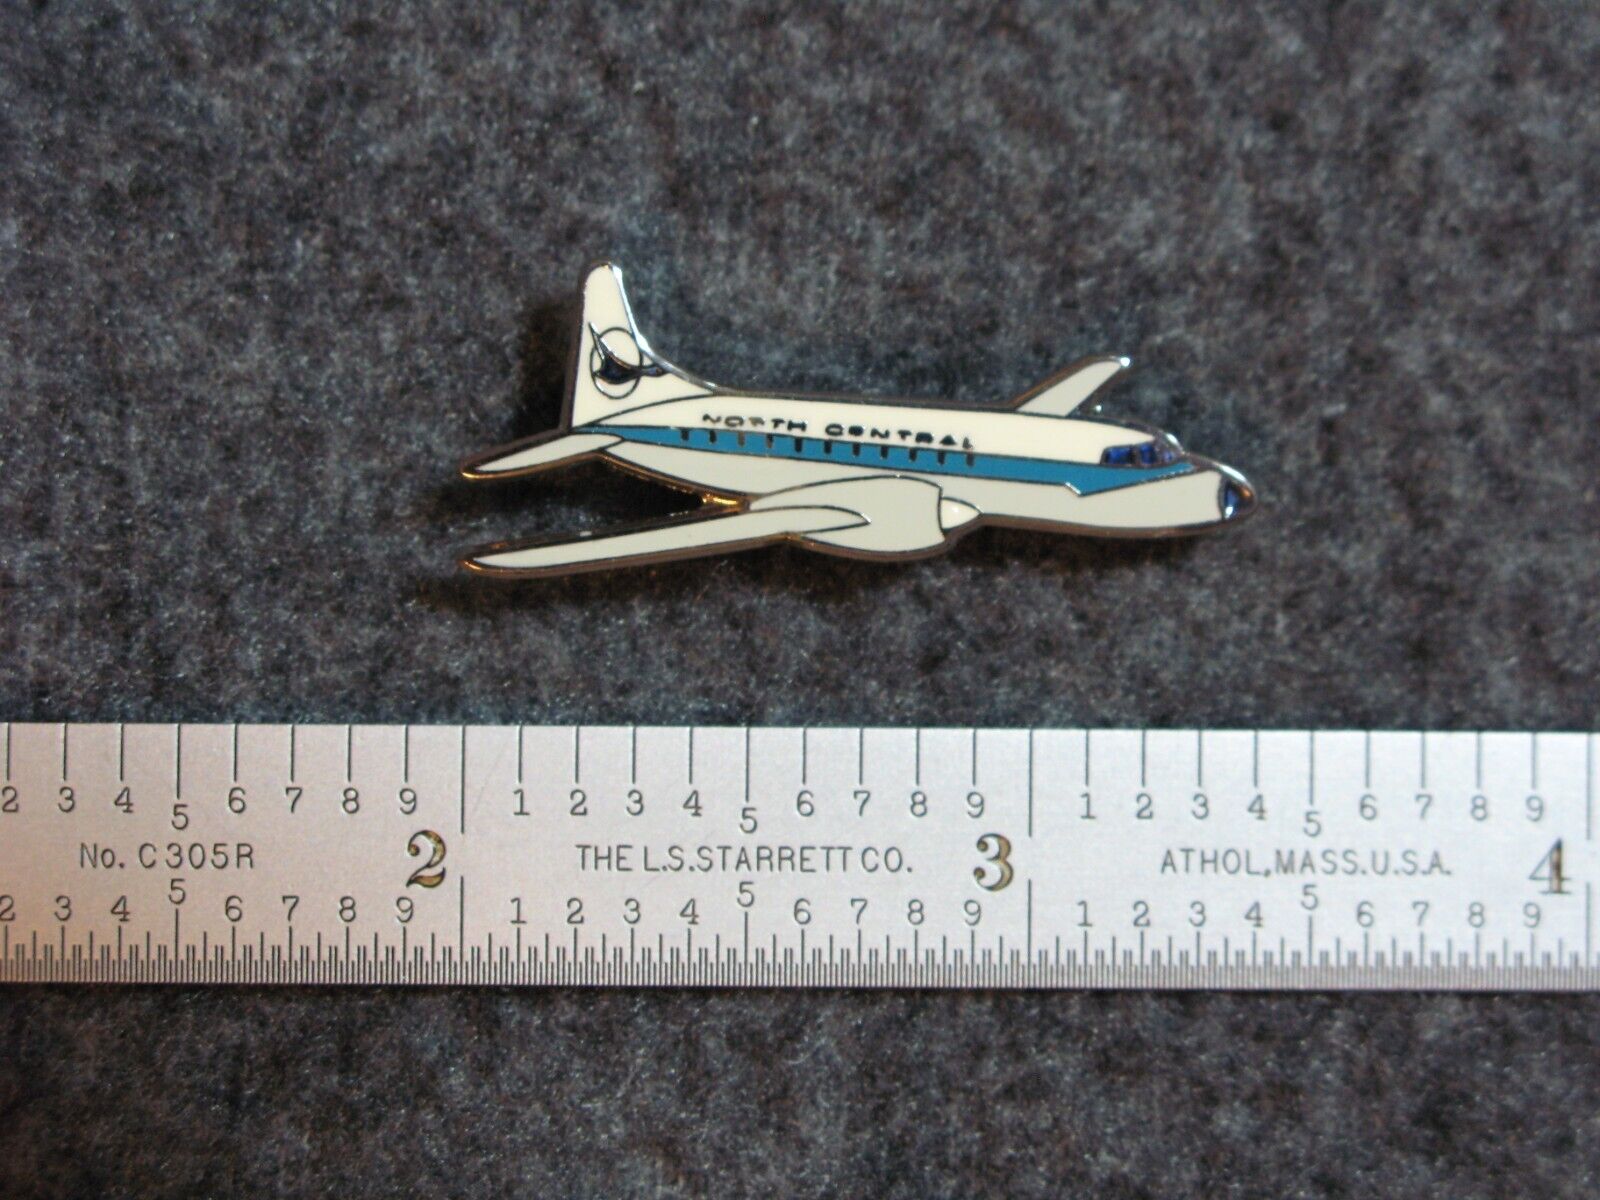 NORTH CENTRAL AIRLINES CONVAIR CV-580 PIN.